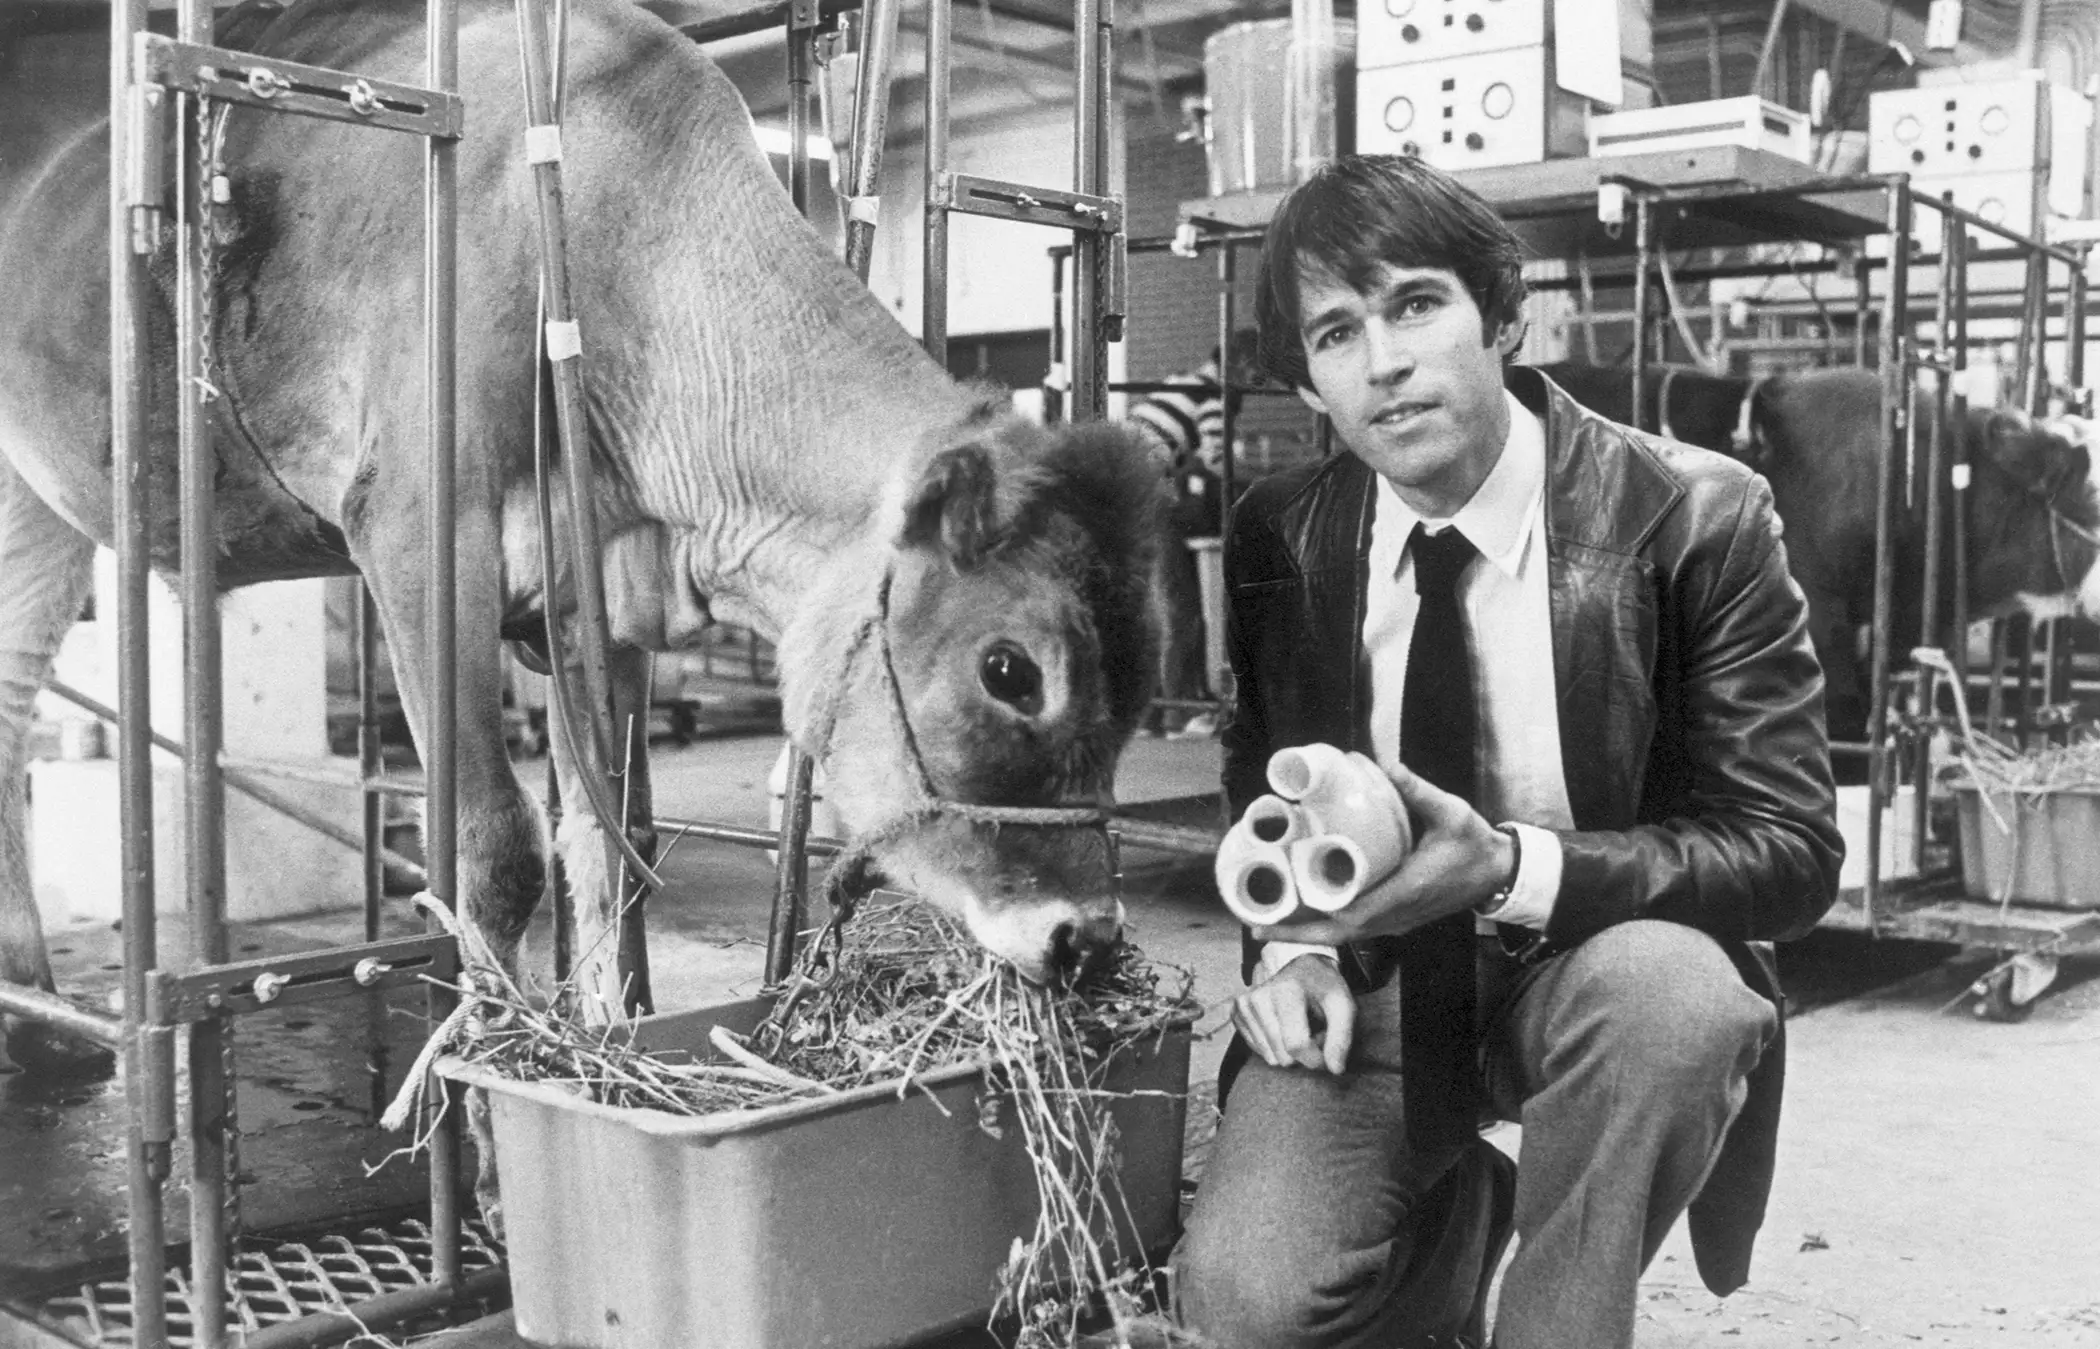 Dr. Robert K. Jarvik, who designed the University of Utah mechanical heart of plastic, is seen here last month with calf that lived for 268 days with the machine beating in the place of its heart. He holds the plastic heart device in hand, Salt Lake City, Utah, March 17, 1981.